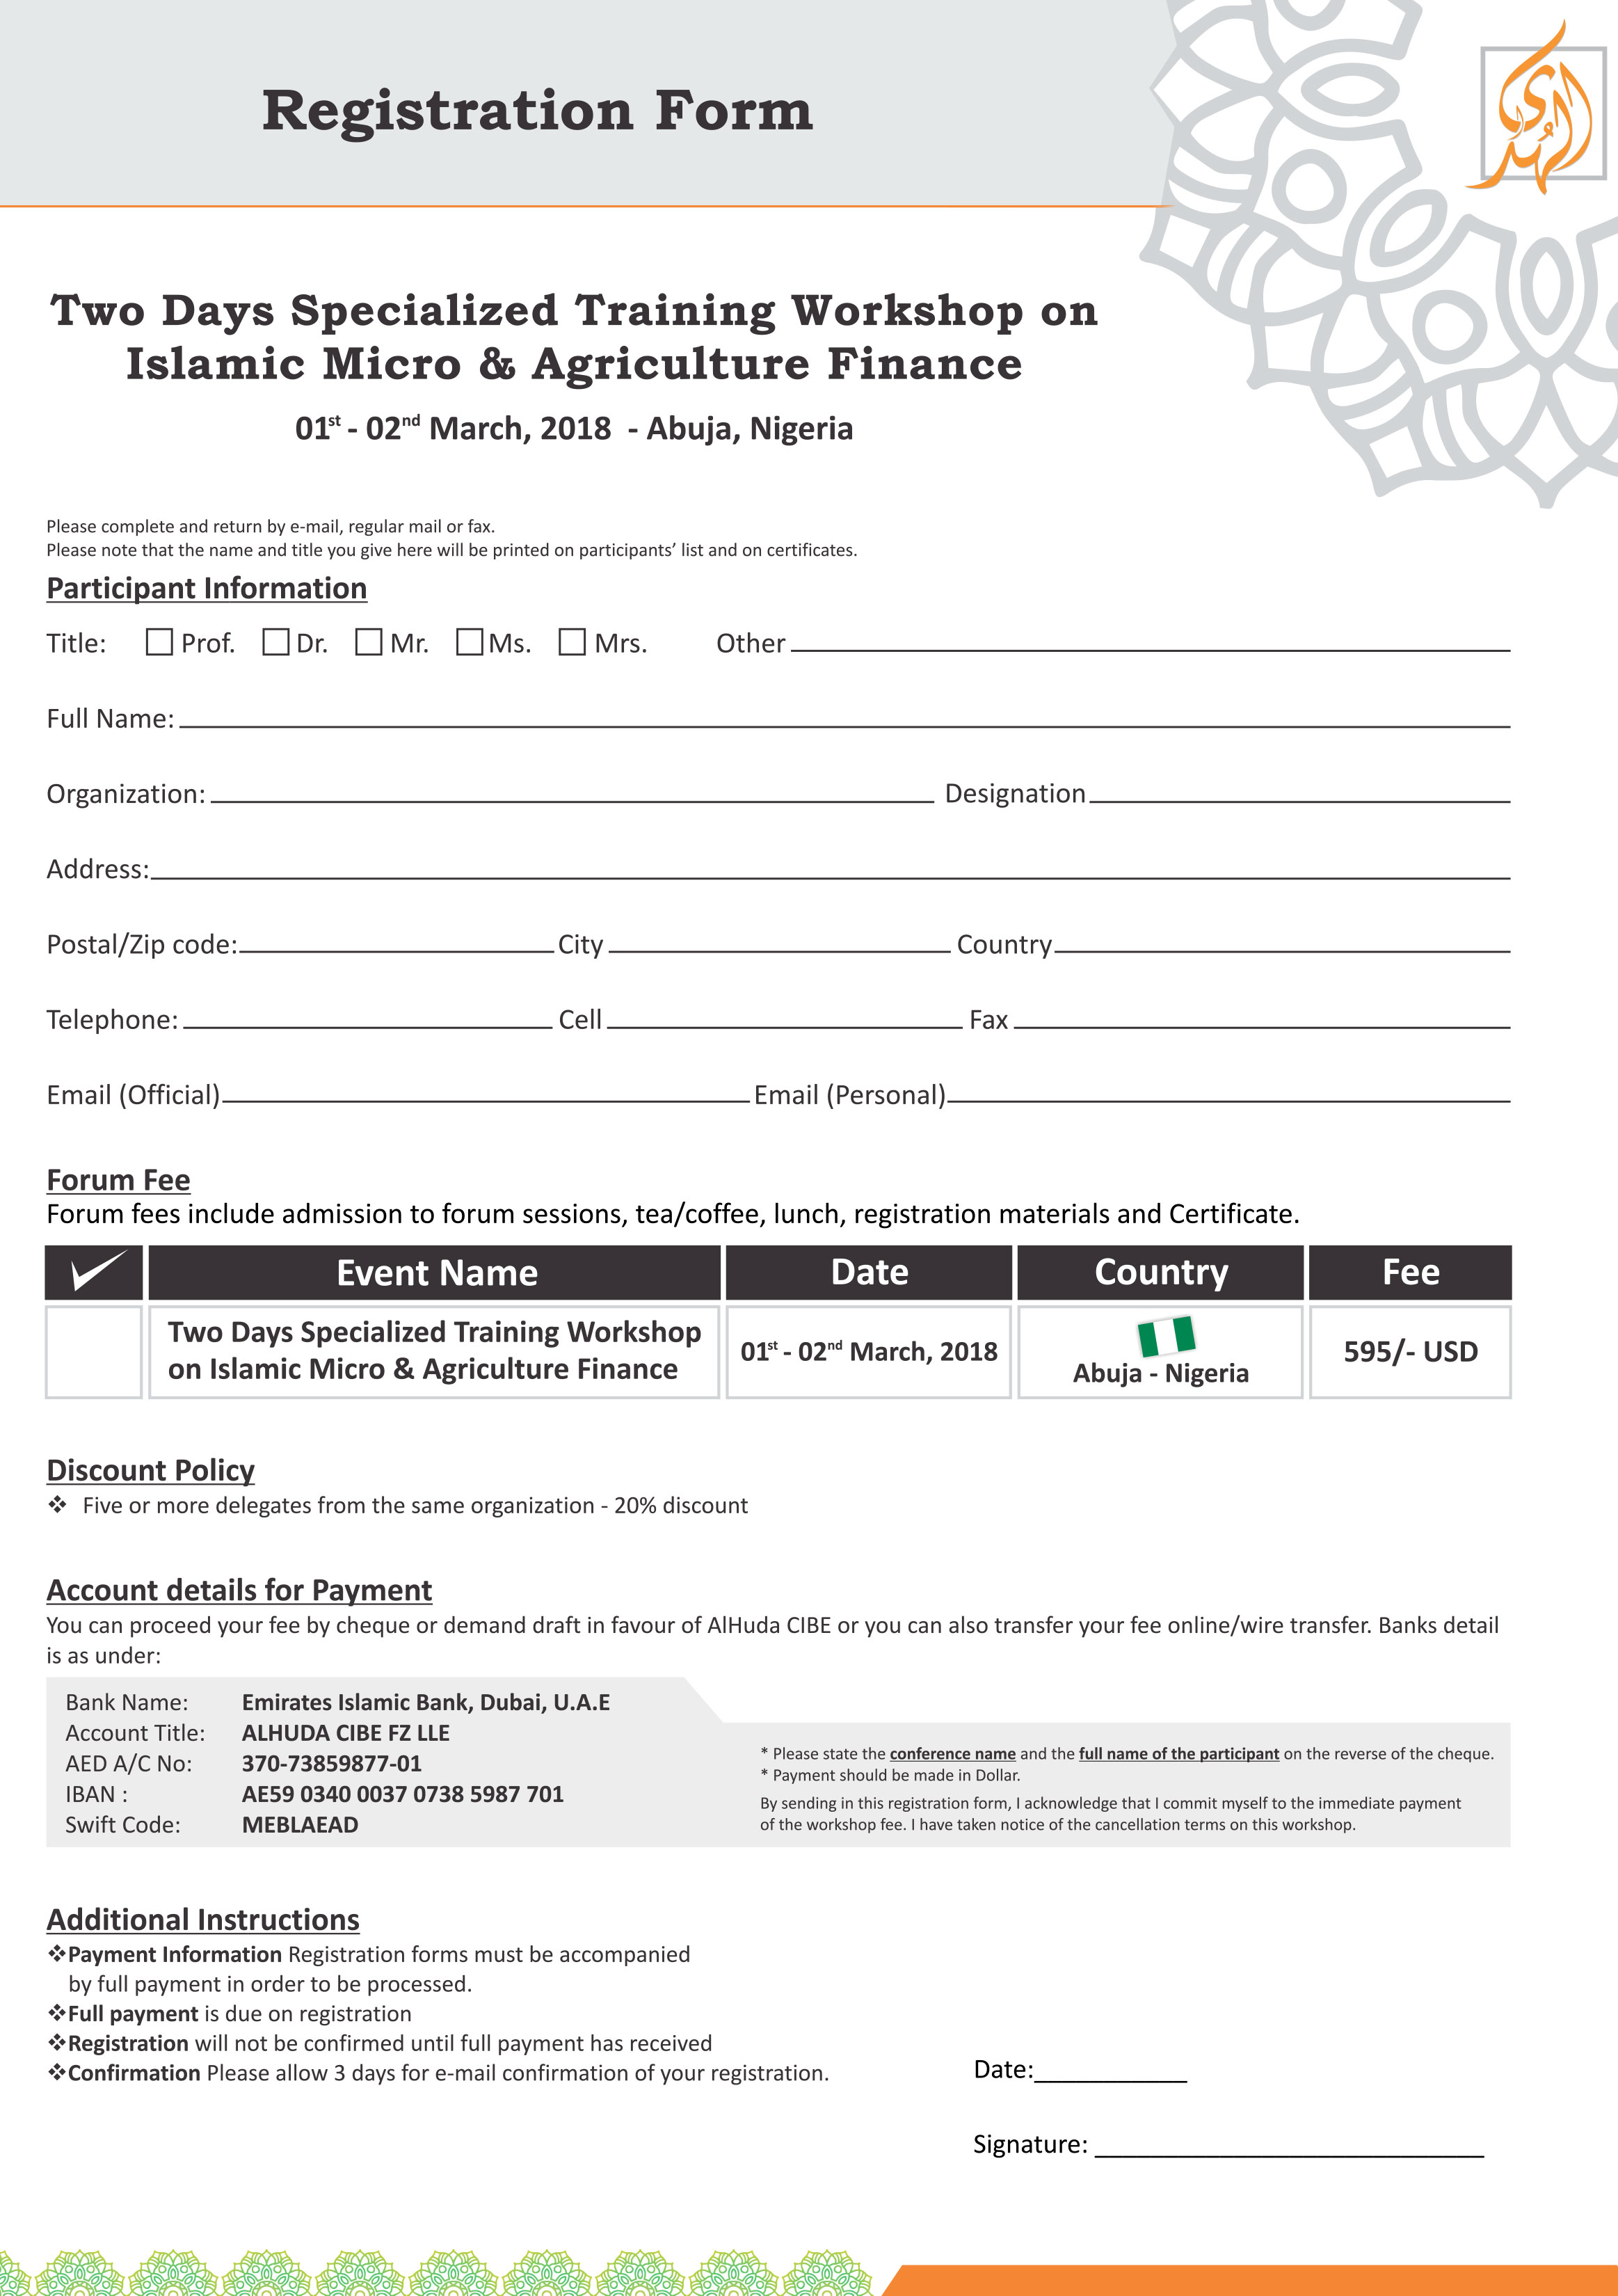 Registration - Two Days Specialized Training Workshop on Islamic Micro & Agriculture Finance will be held on 1st - 2nd March, 2018 at Abuja - Nigeria